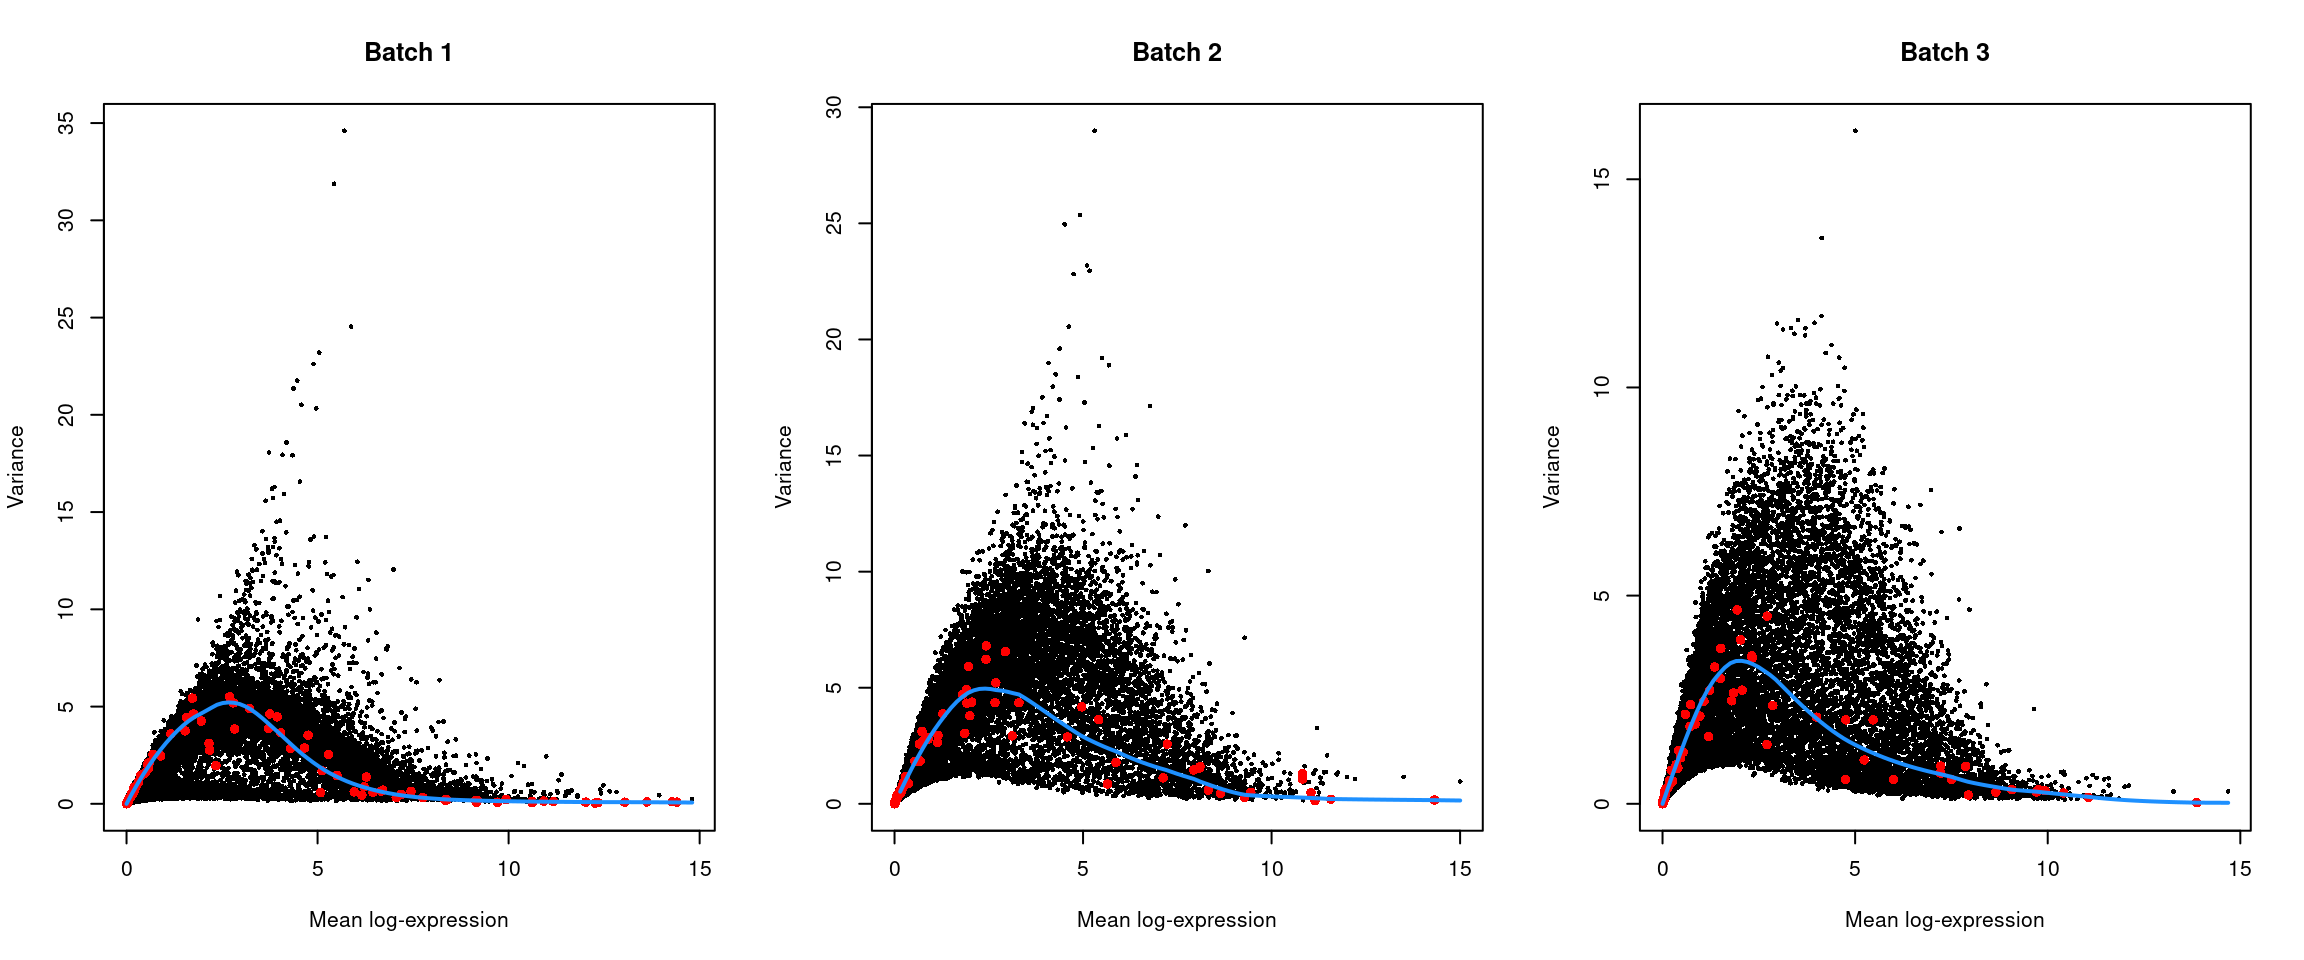 Per-gene variance of the log-normalized expression values in the Messmer hESC dataset, plotted against the mean for each batch. Each point represents a gene with spike-ins shown in red and the fitted trend shown in blue.